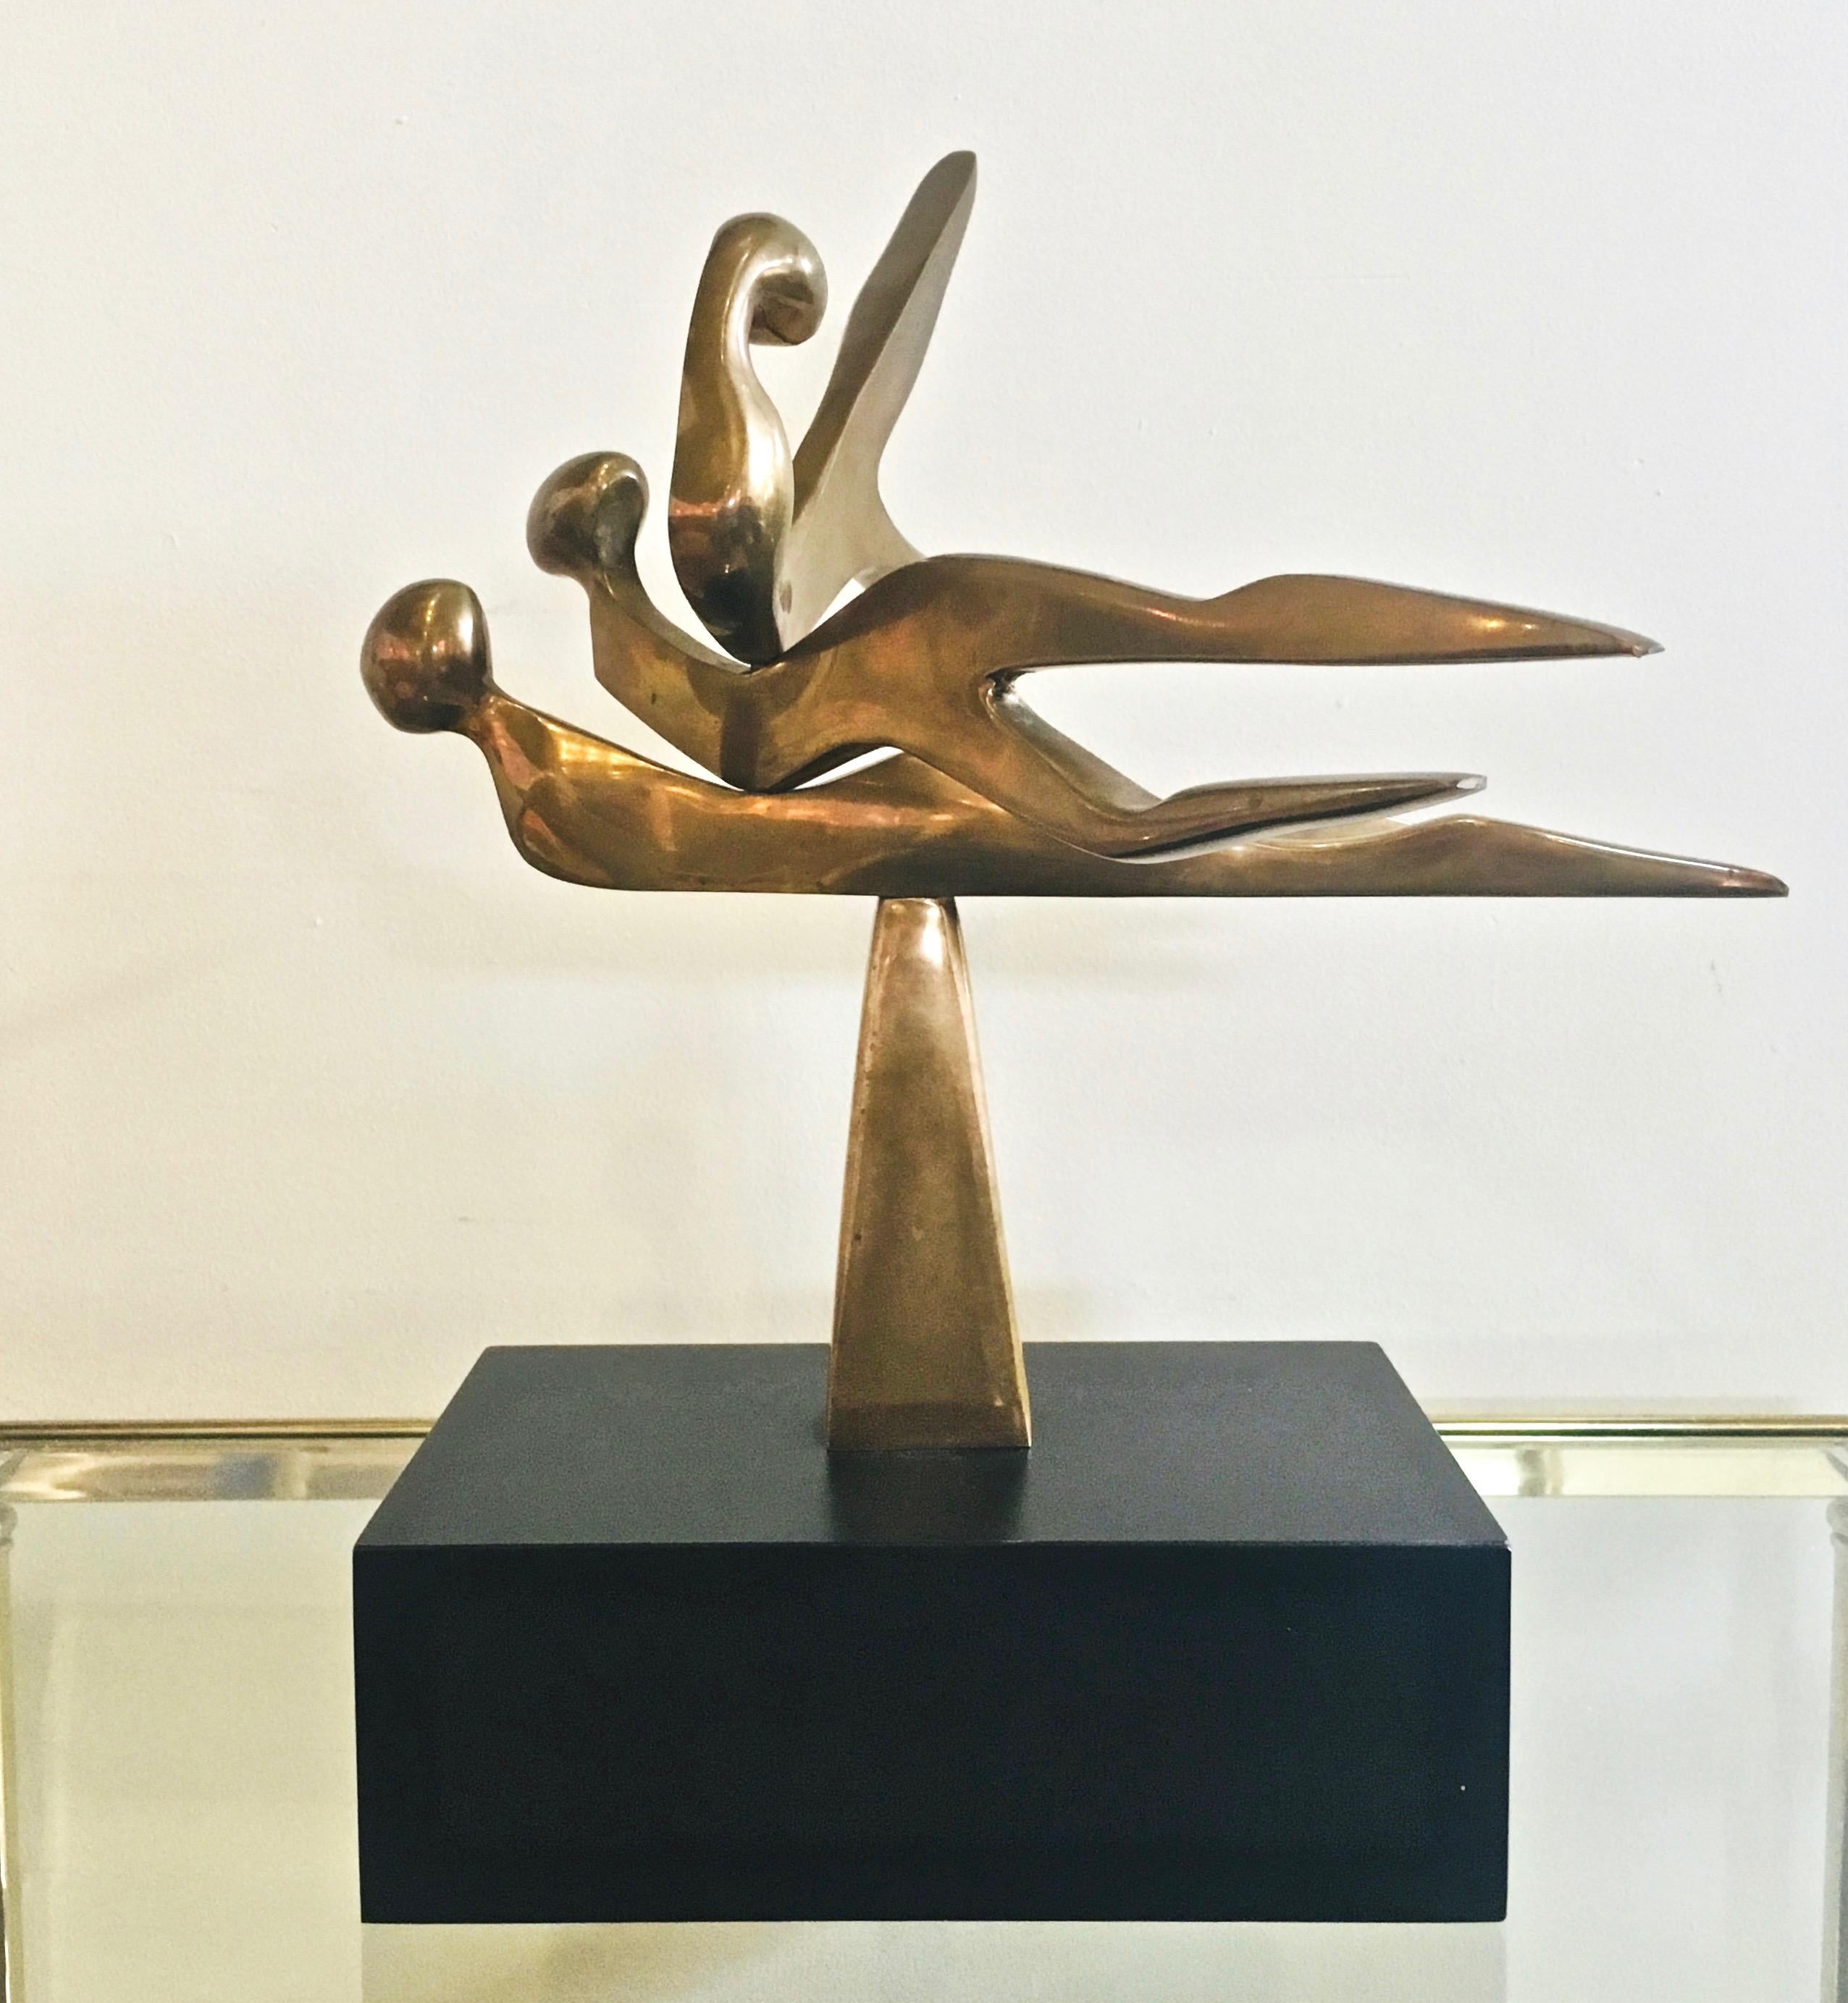 Abstract (solid brass) kinetic sculpture, by Arleen Eichengreen and Nancy Gensburg (American, 20th Century), Untitled, [Three Forms], figural sculpture of interacting brass forms each able to move independently, atop a solid brass pyramid mounted on